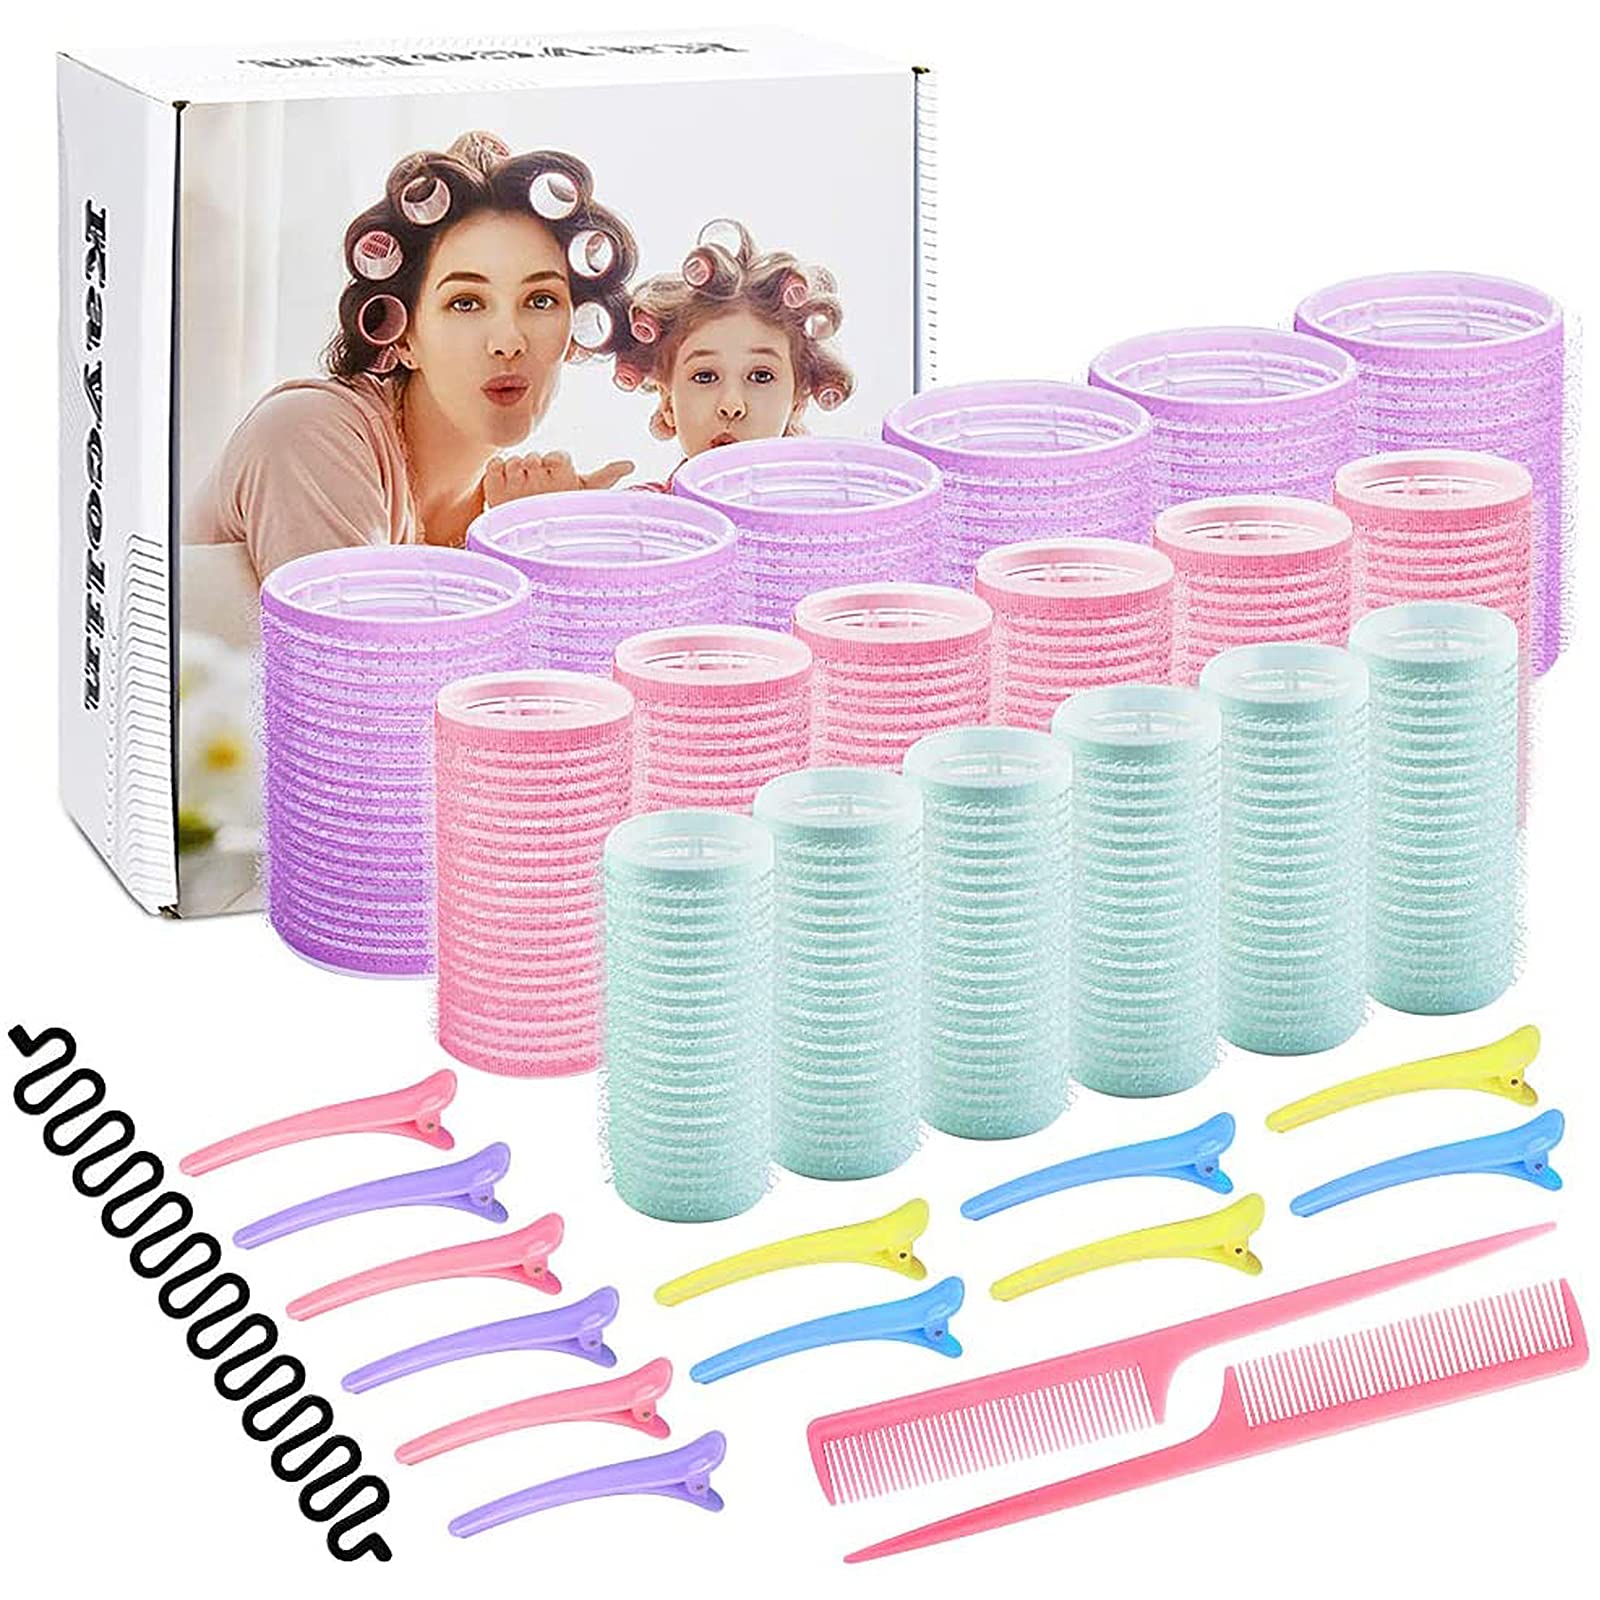 NEW NOAM Rollers Hair curlers for Long Hair, 33 Pcs Self grip Hair Rollers Set, 25 mm, 30 mm, 44 mm curling Rollers for Fine Thin Hair, H